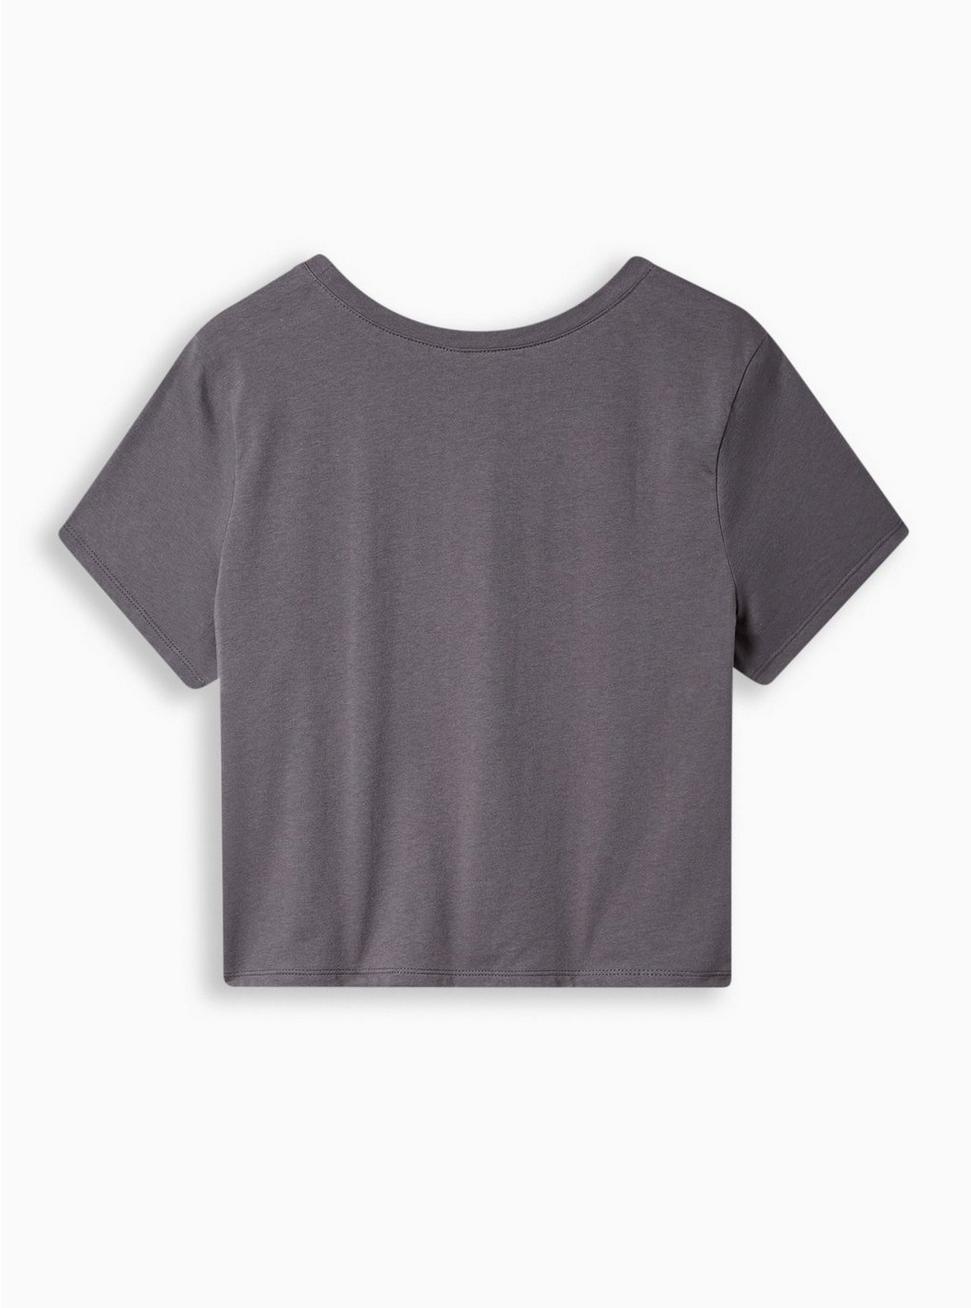 Nashville Classic Fit Polyester Cotton Crew Crop Tee, CHARCOAL, alternate